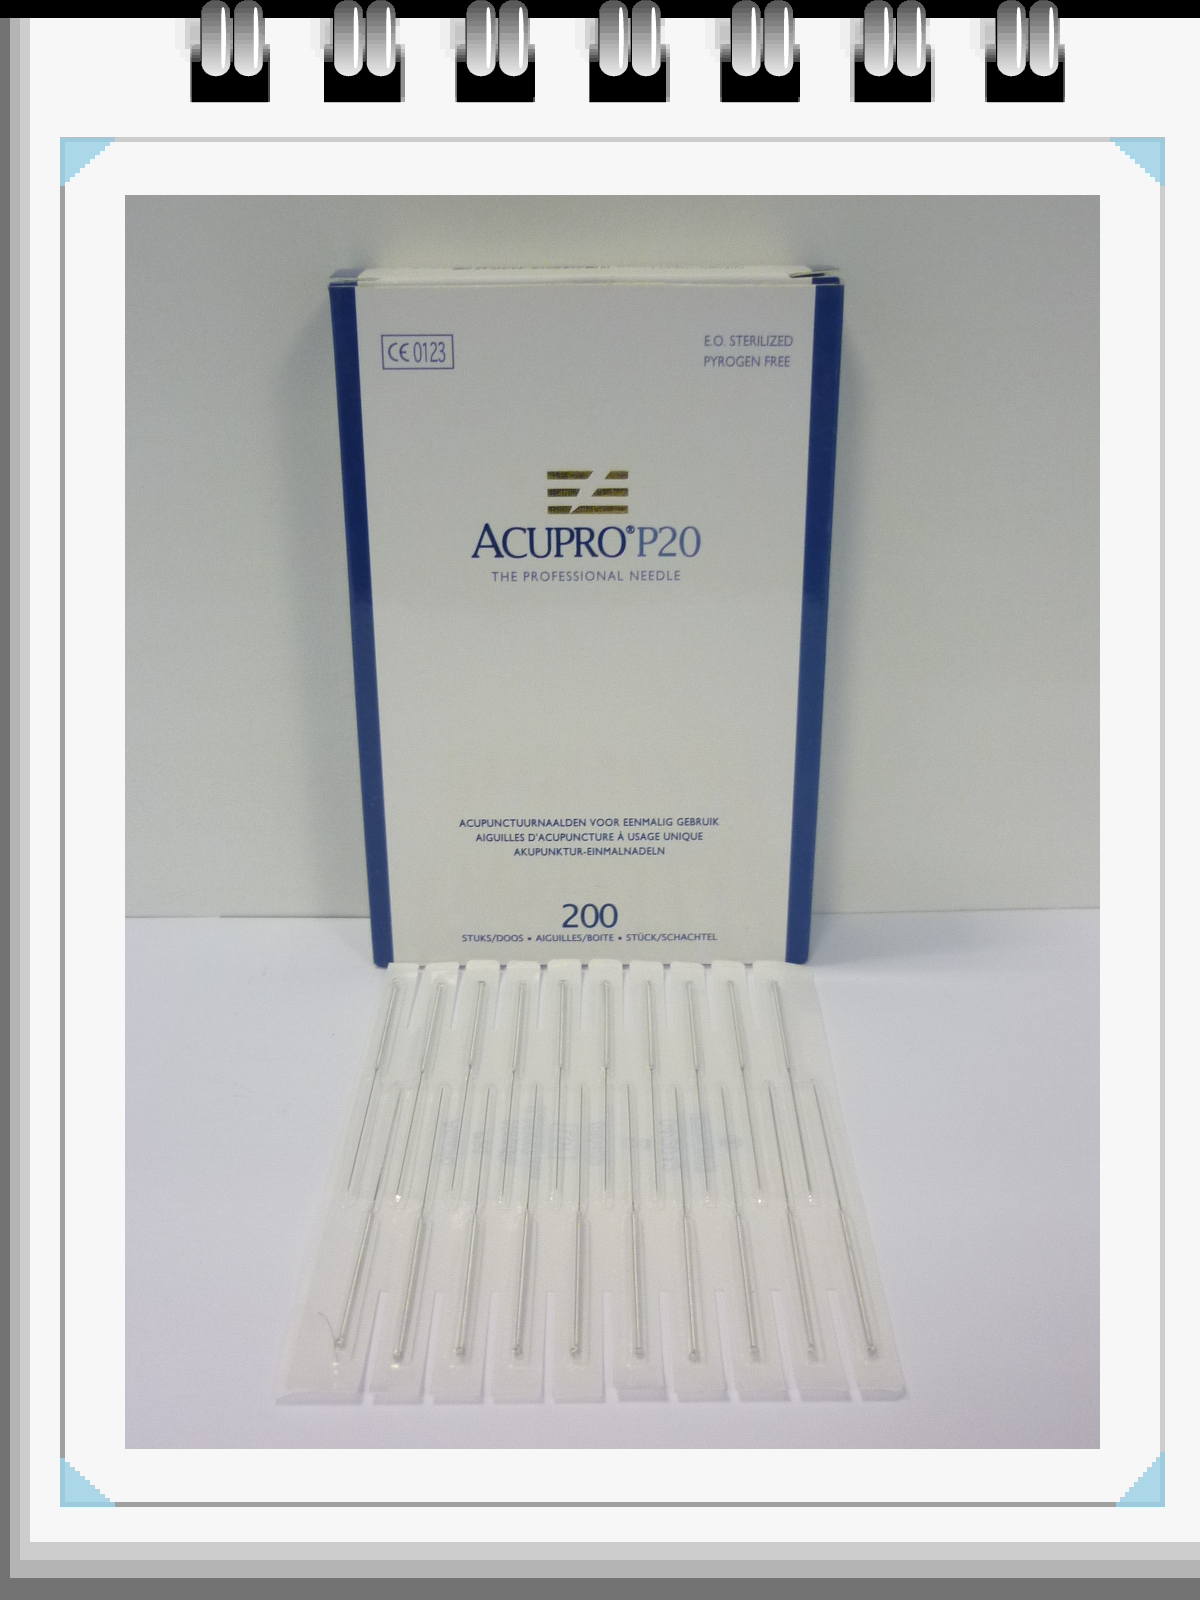 All Products - Acupuncture naalden 0,20 x 40mm - p--200